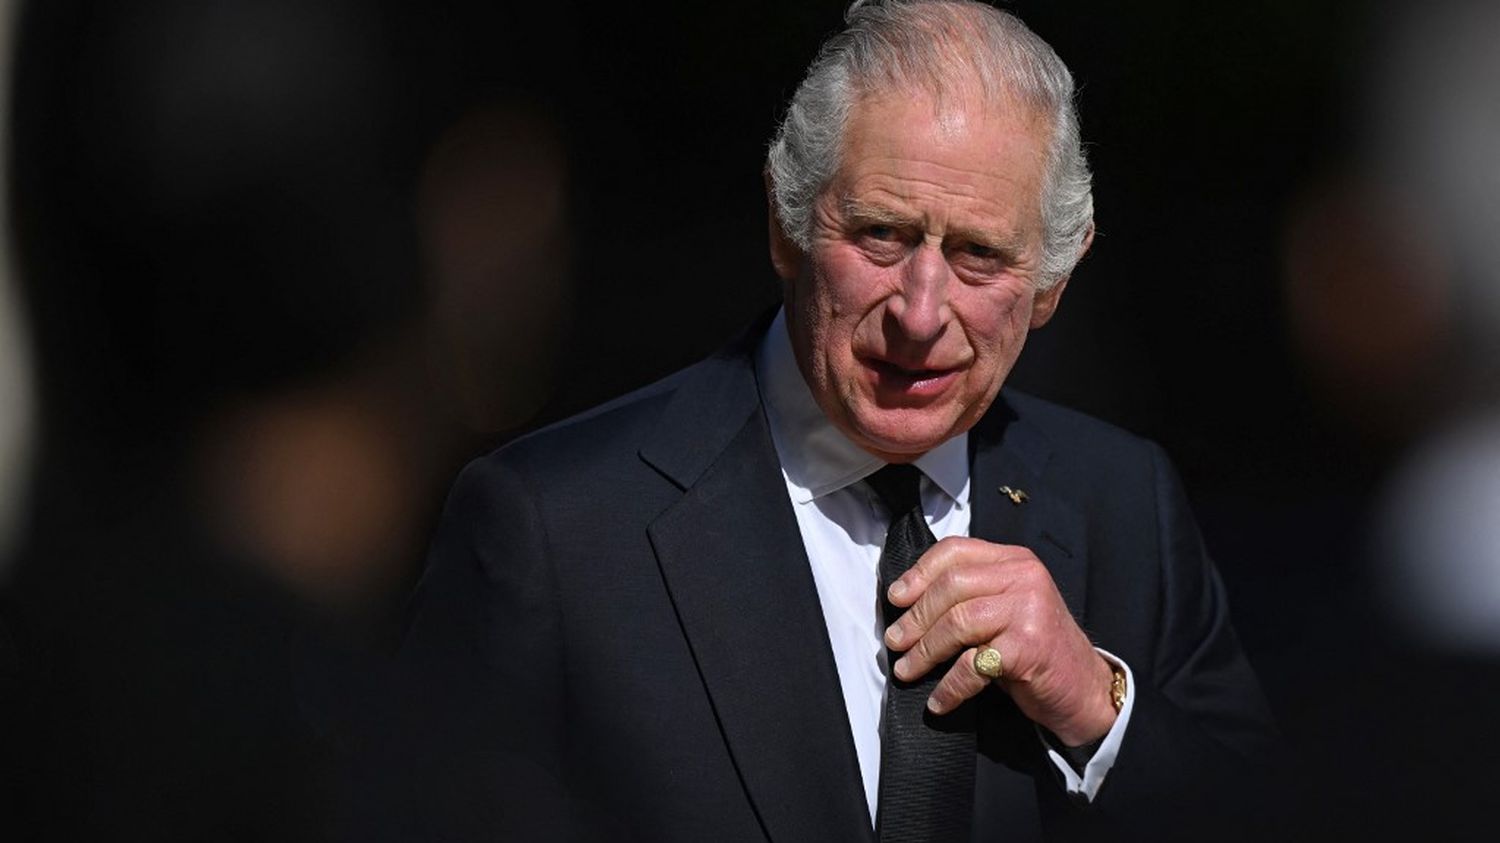 On the eve of the funeral of Elizabeth II, Charles III thanks the public for their support
